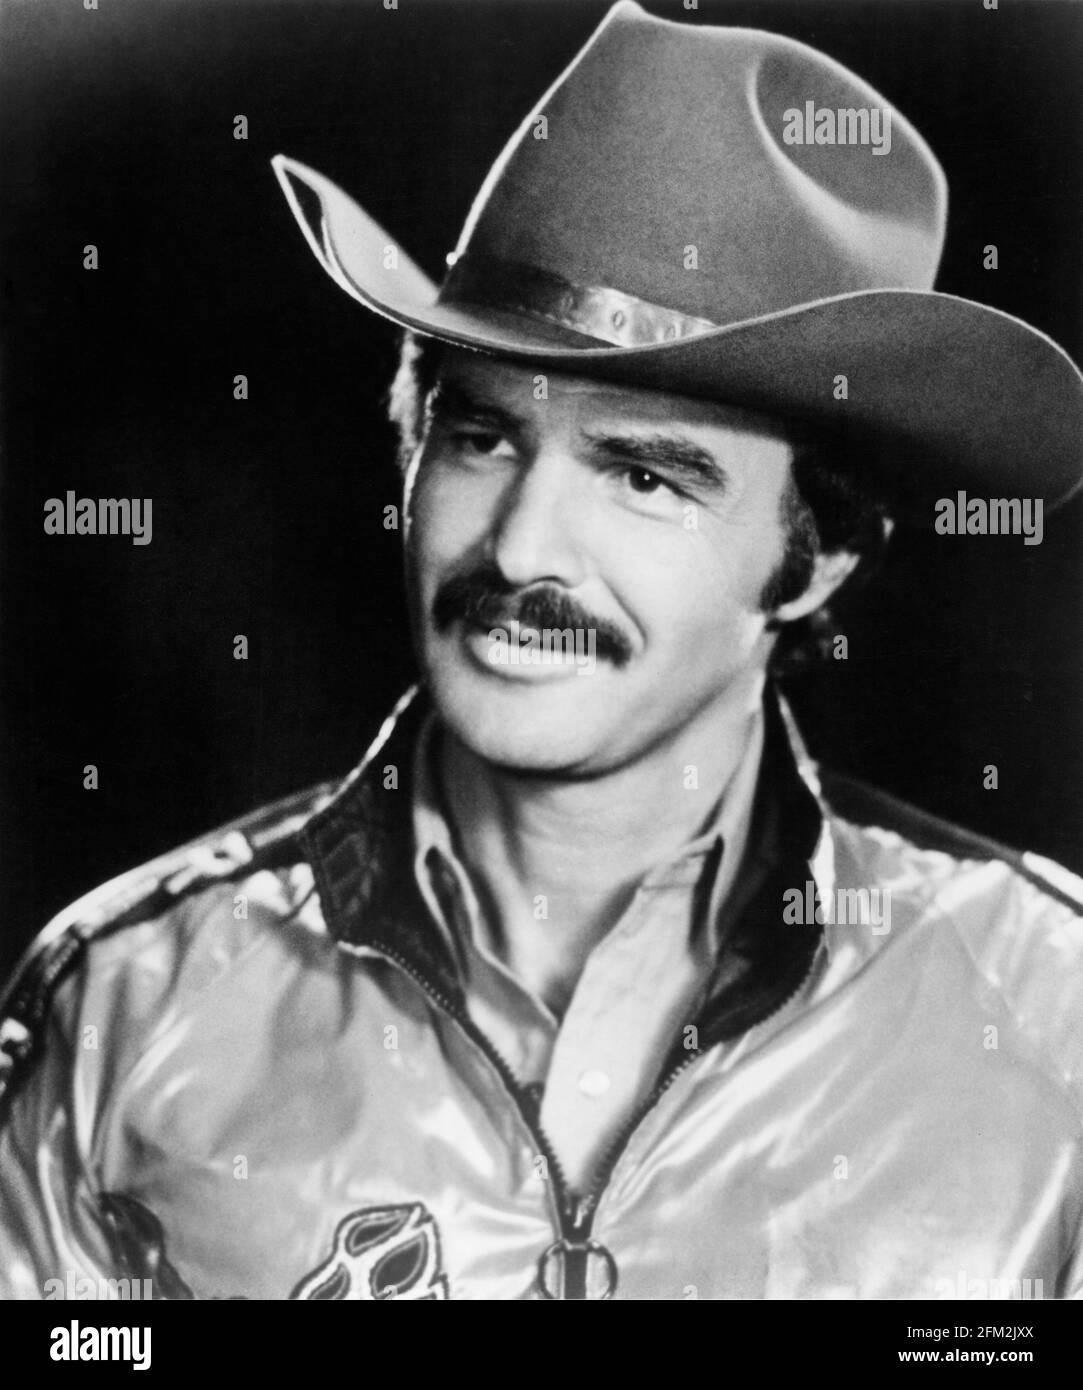 Burt Reynolds, Head and Shoulders Publicity Portrait for the Film, 'Smokey and The Bandit II', Universal Pictures, 1980 Stock Photo